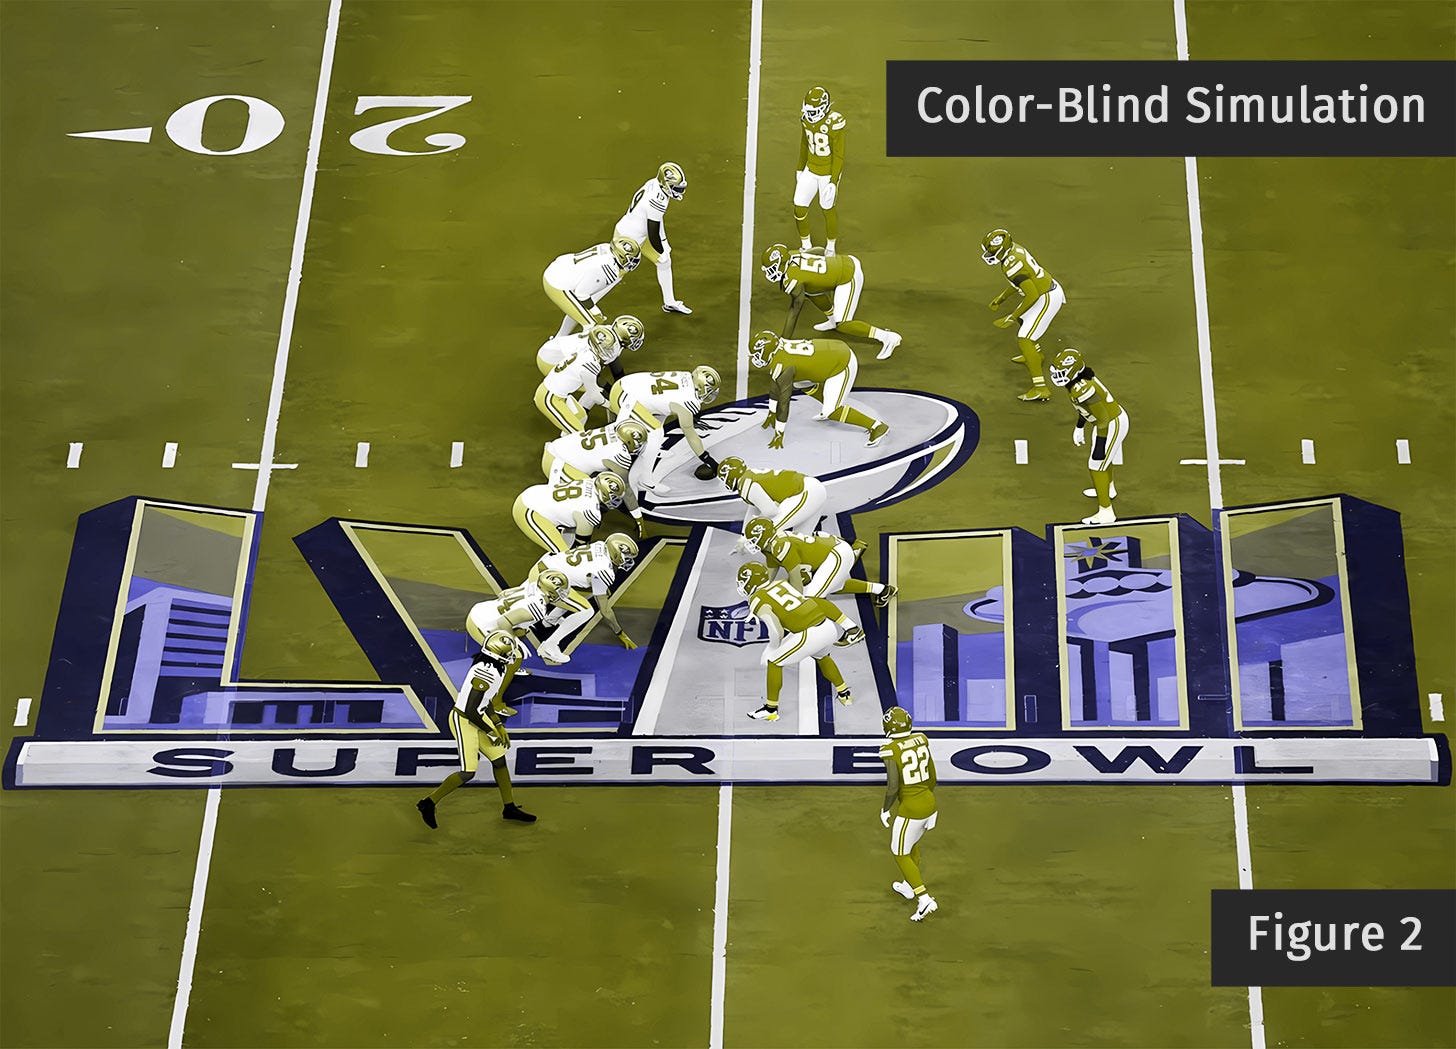 Full view of color-blind simulation